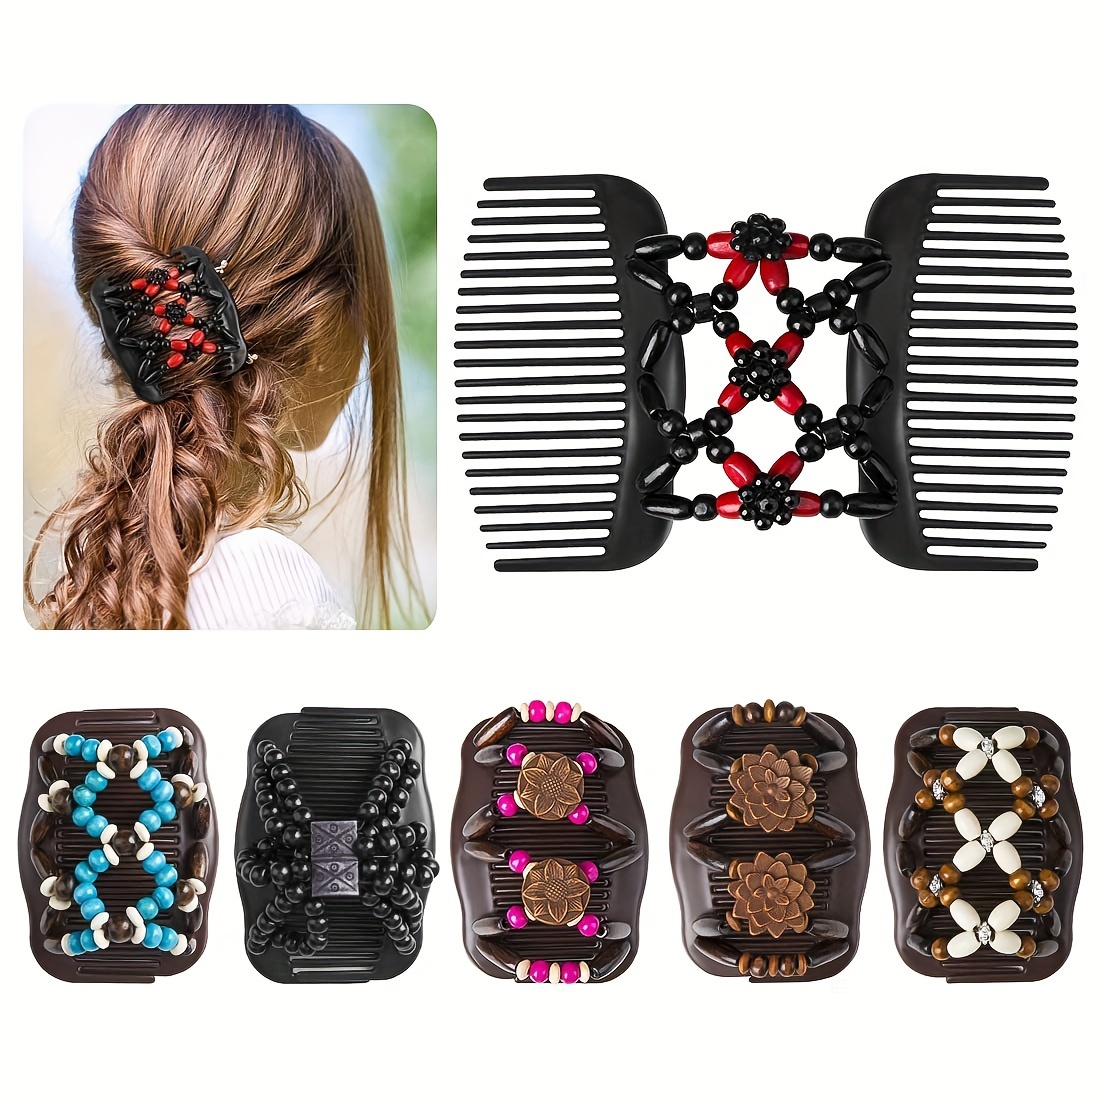 

2pcs, Retro Exquisite Cool Stretchy Hair Comb Clips, Boho Style Premium Wooden Hair Clips, Women Girls Casual Leisure Hair Accessories, Gift Photo Props